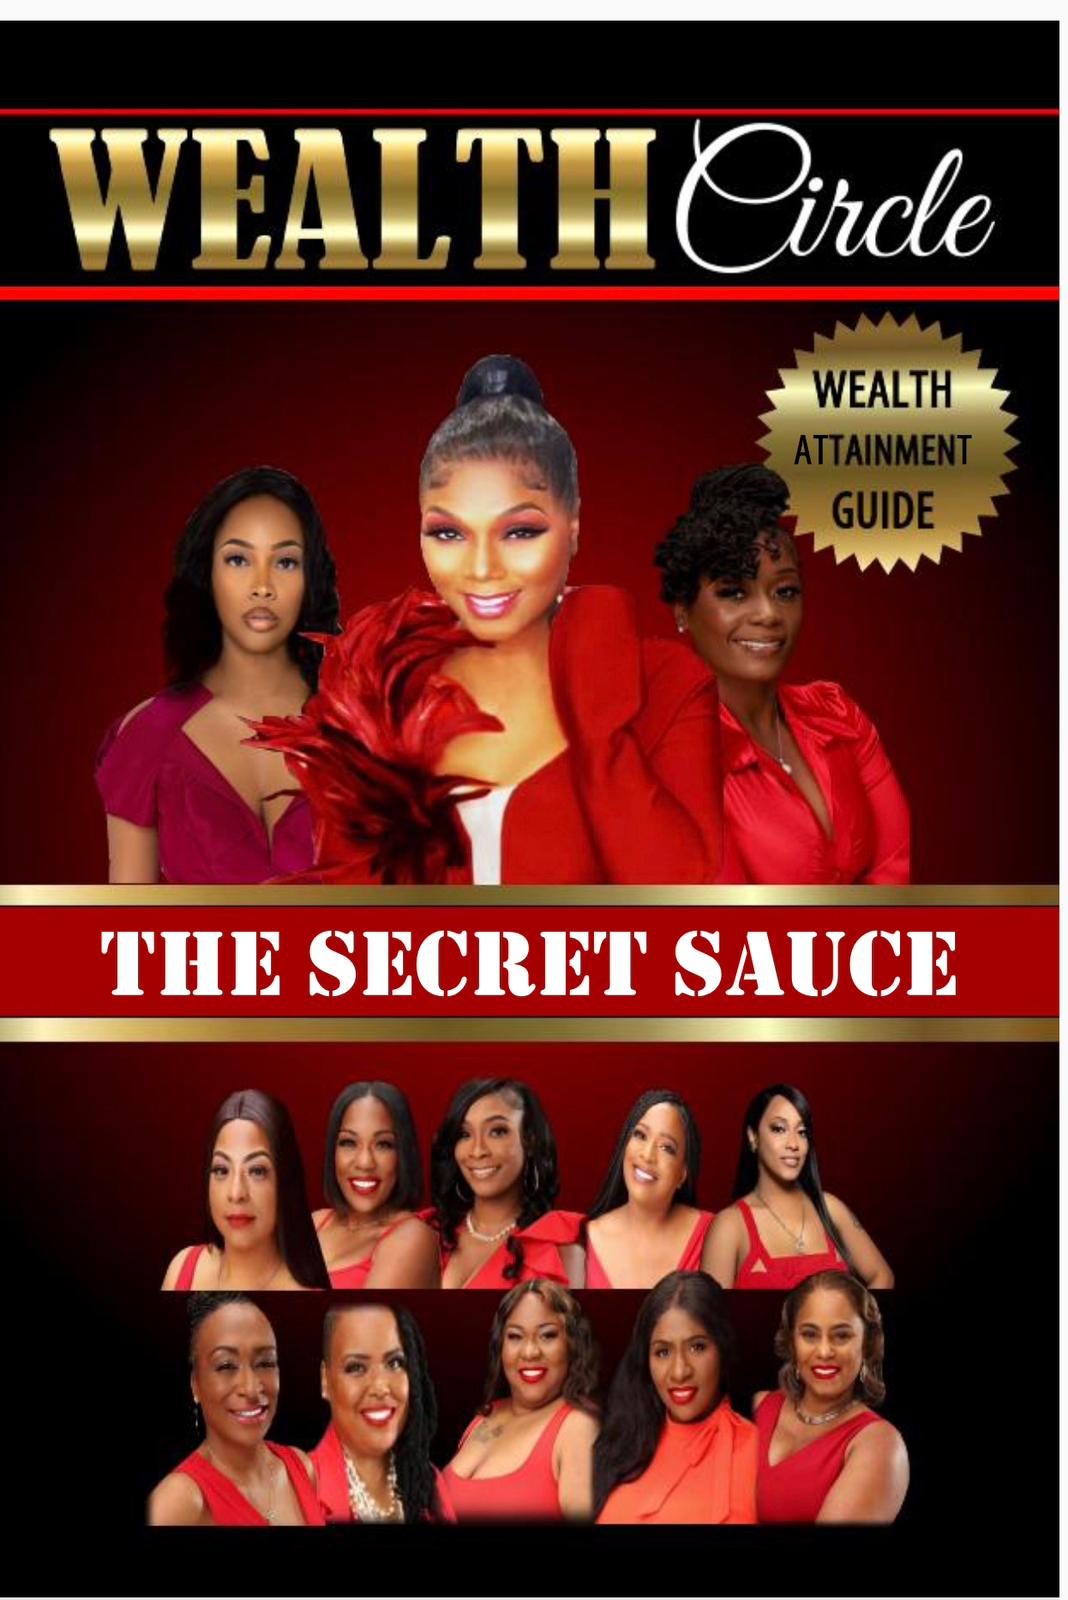 Wealth Circle The Secret Sauce - Blinged by Belle